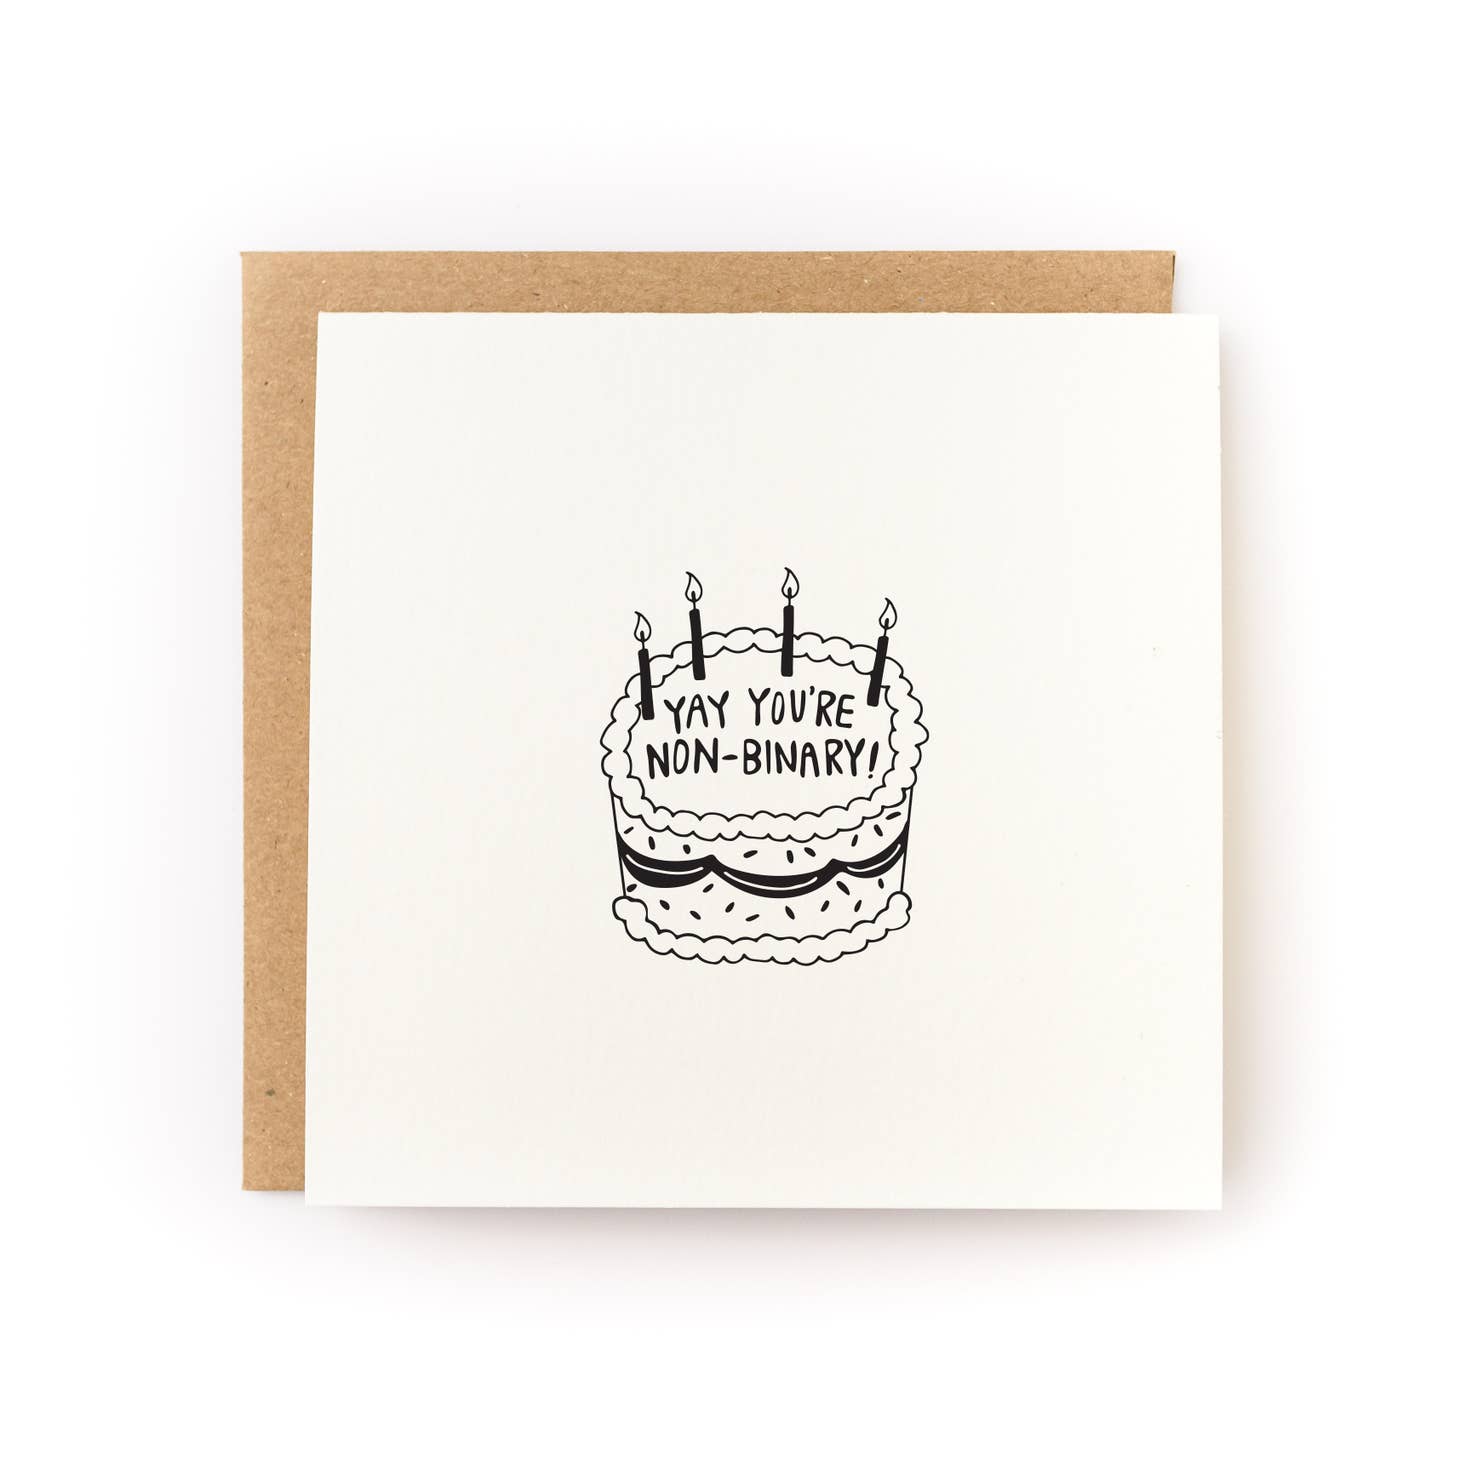 Greeting card with cream background with an image of a cake with black text says, "Yay You're Non-Binary!". Kraft envelope is included. 